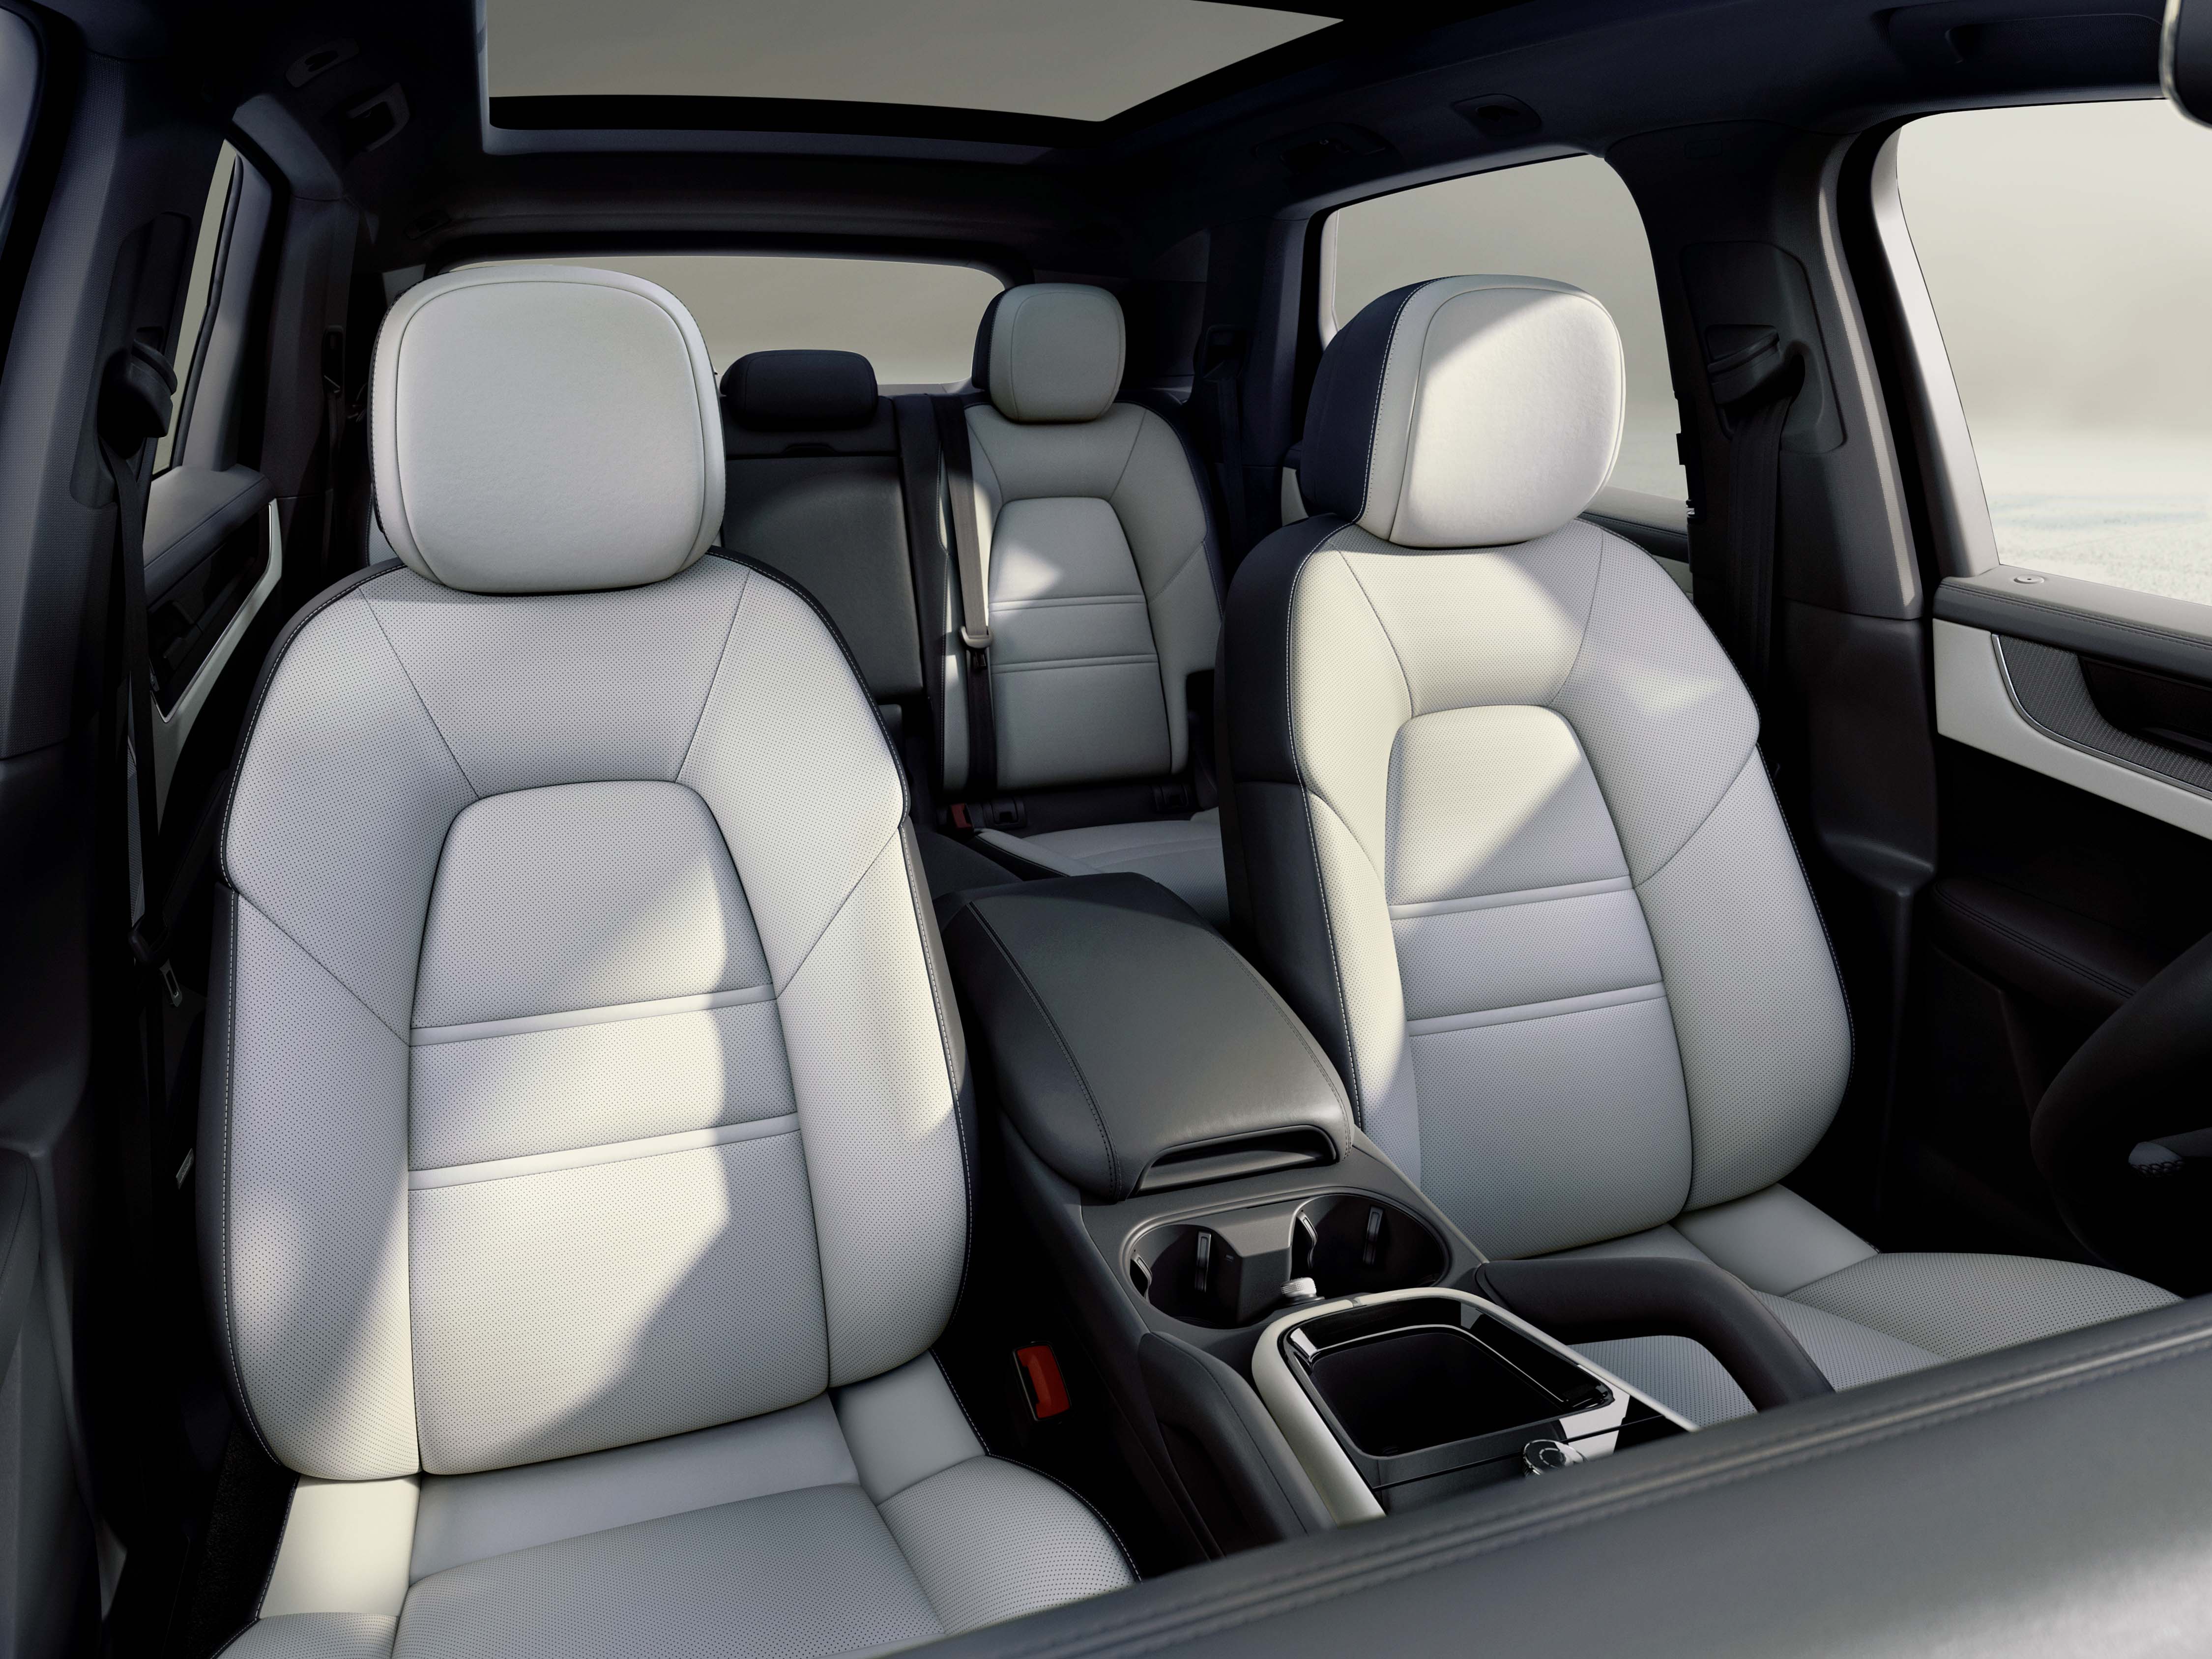 Front and rear seats in the new Porsche Cayenne